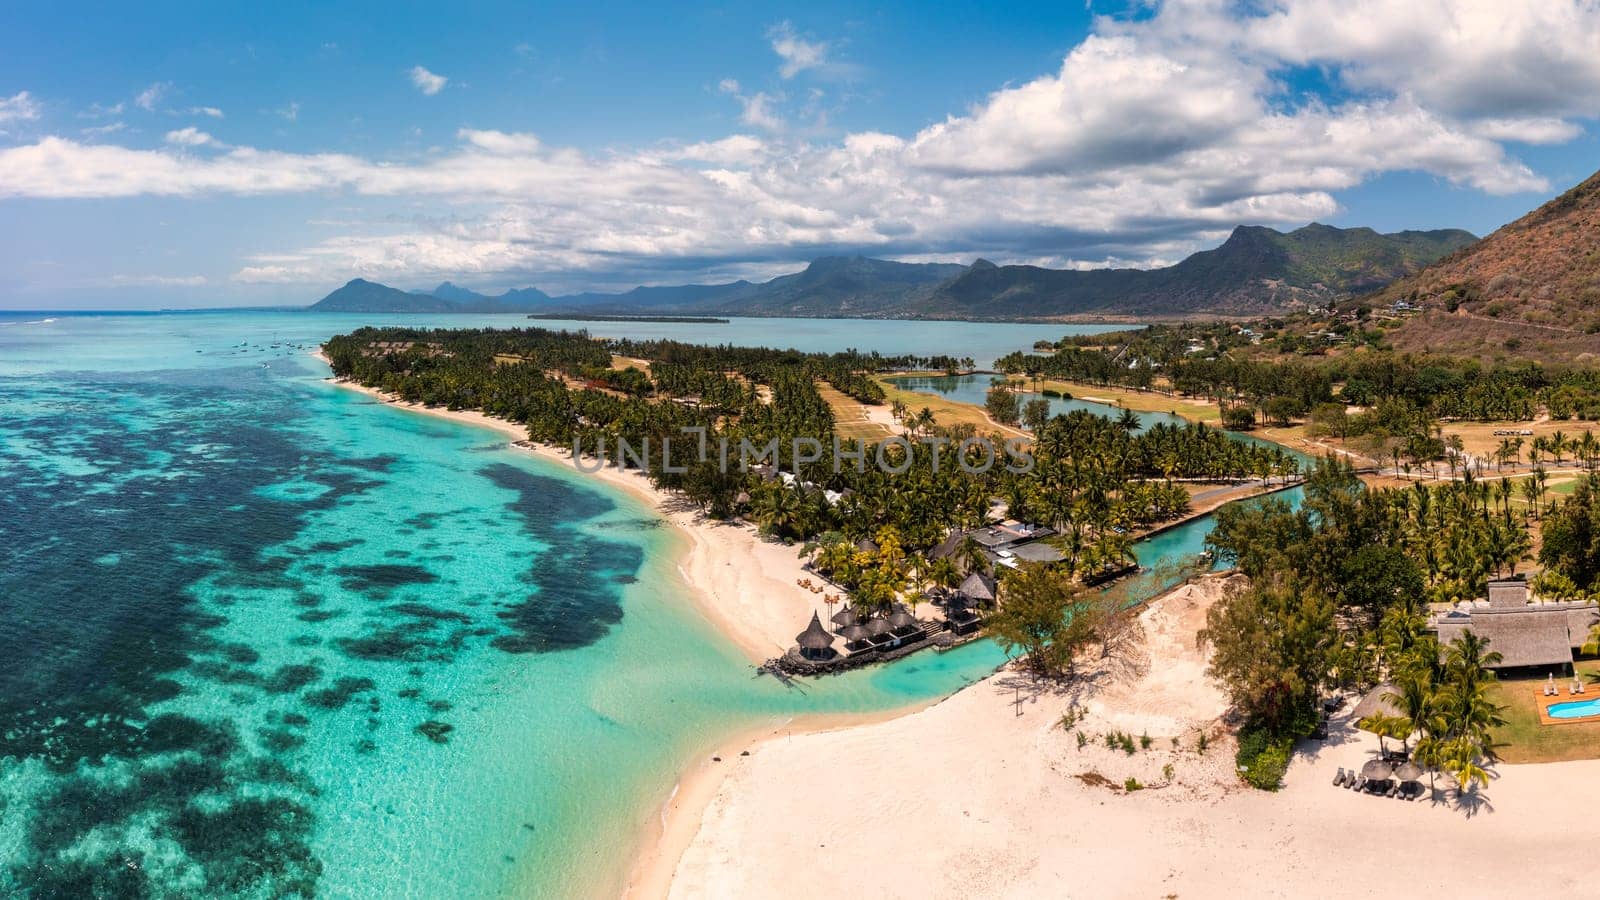 Beach with palm trees and umbrellas on Le morne beach in Mauriutius. Luxury tropical beach and Le Morne mountain in Mauritius. Le Morne beach with palm trees, white sand and luxury resorts, Mauritius by DaLiu